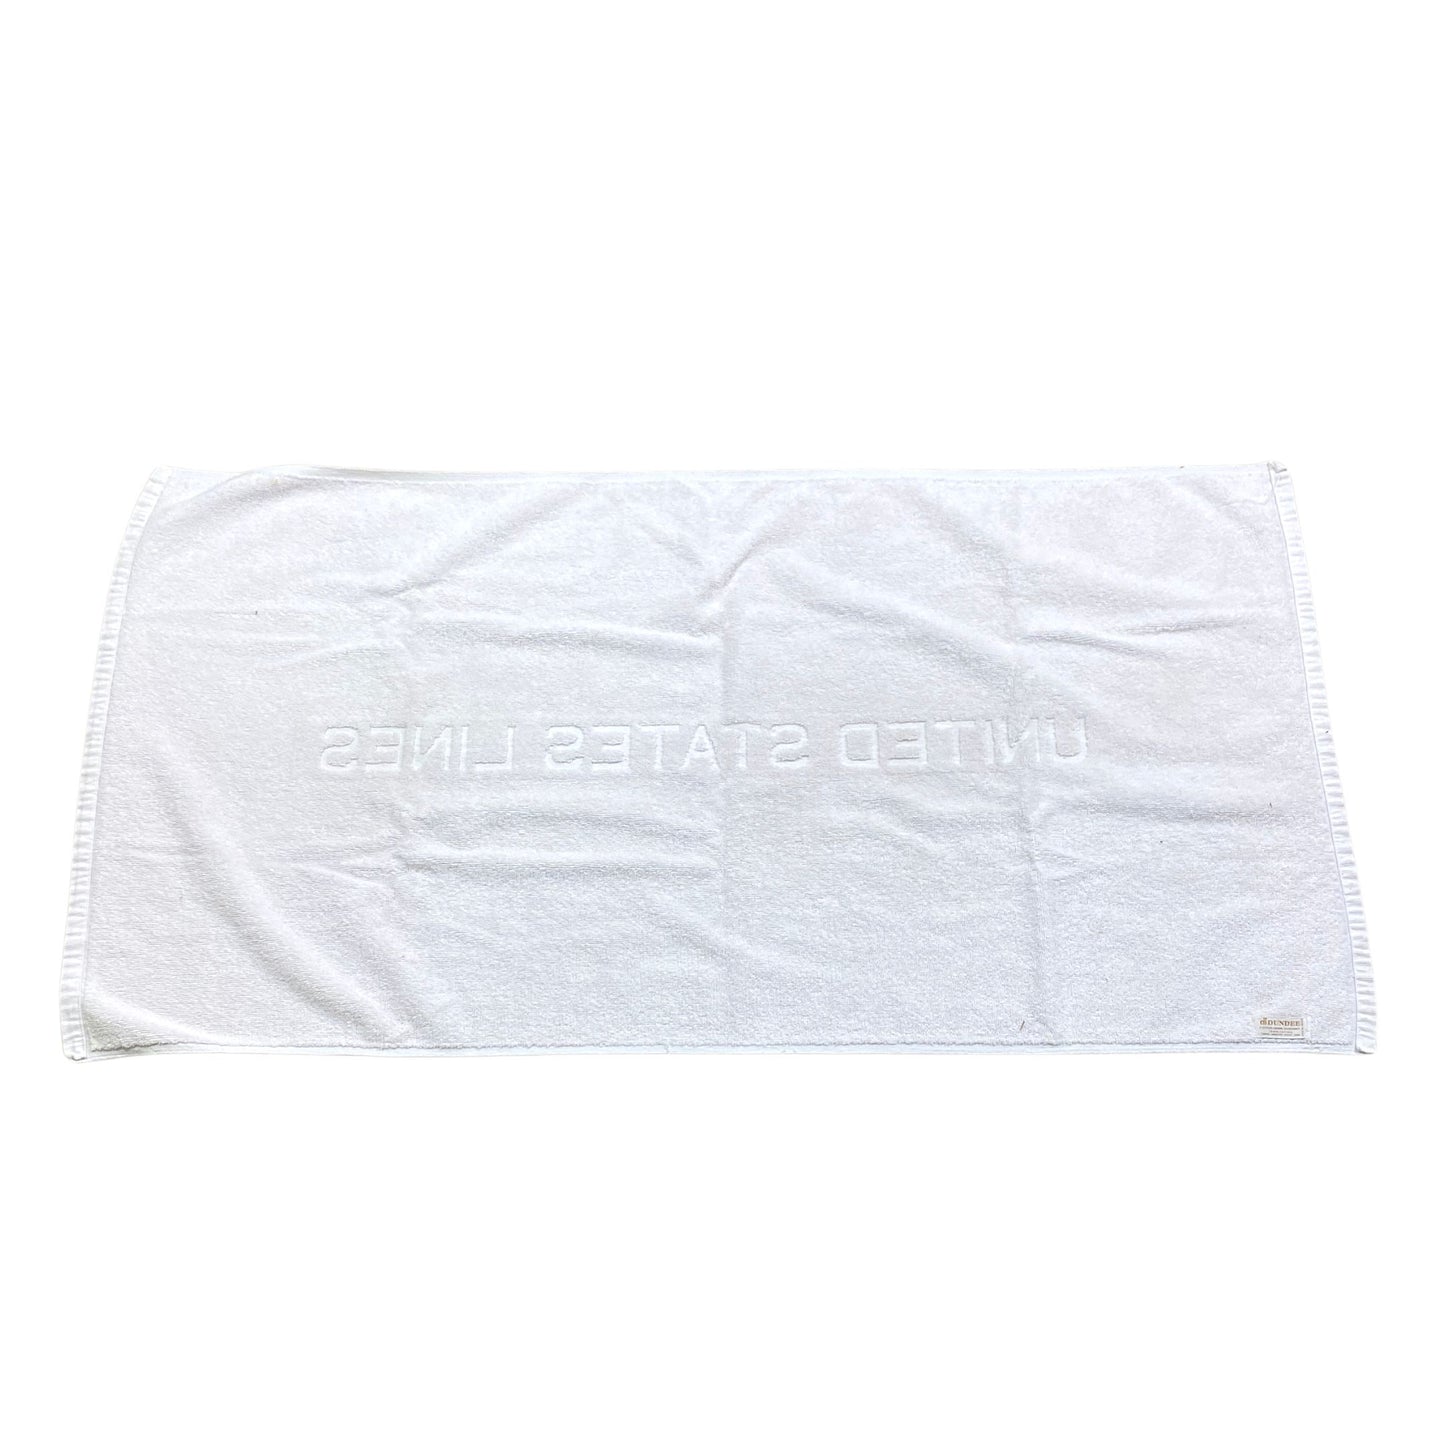 United States Lines SS United States Pair of Embossed Bath Towels